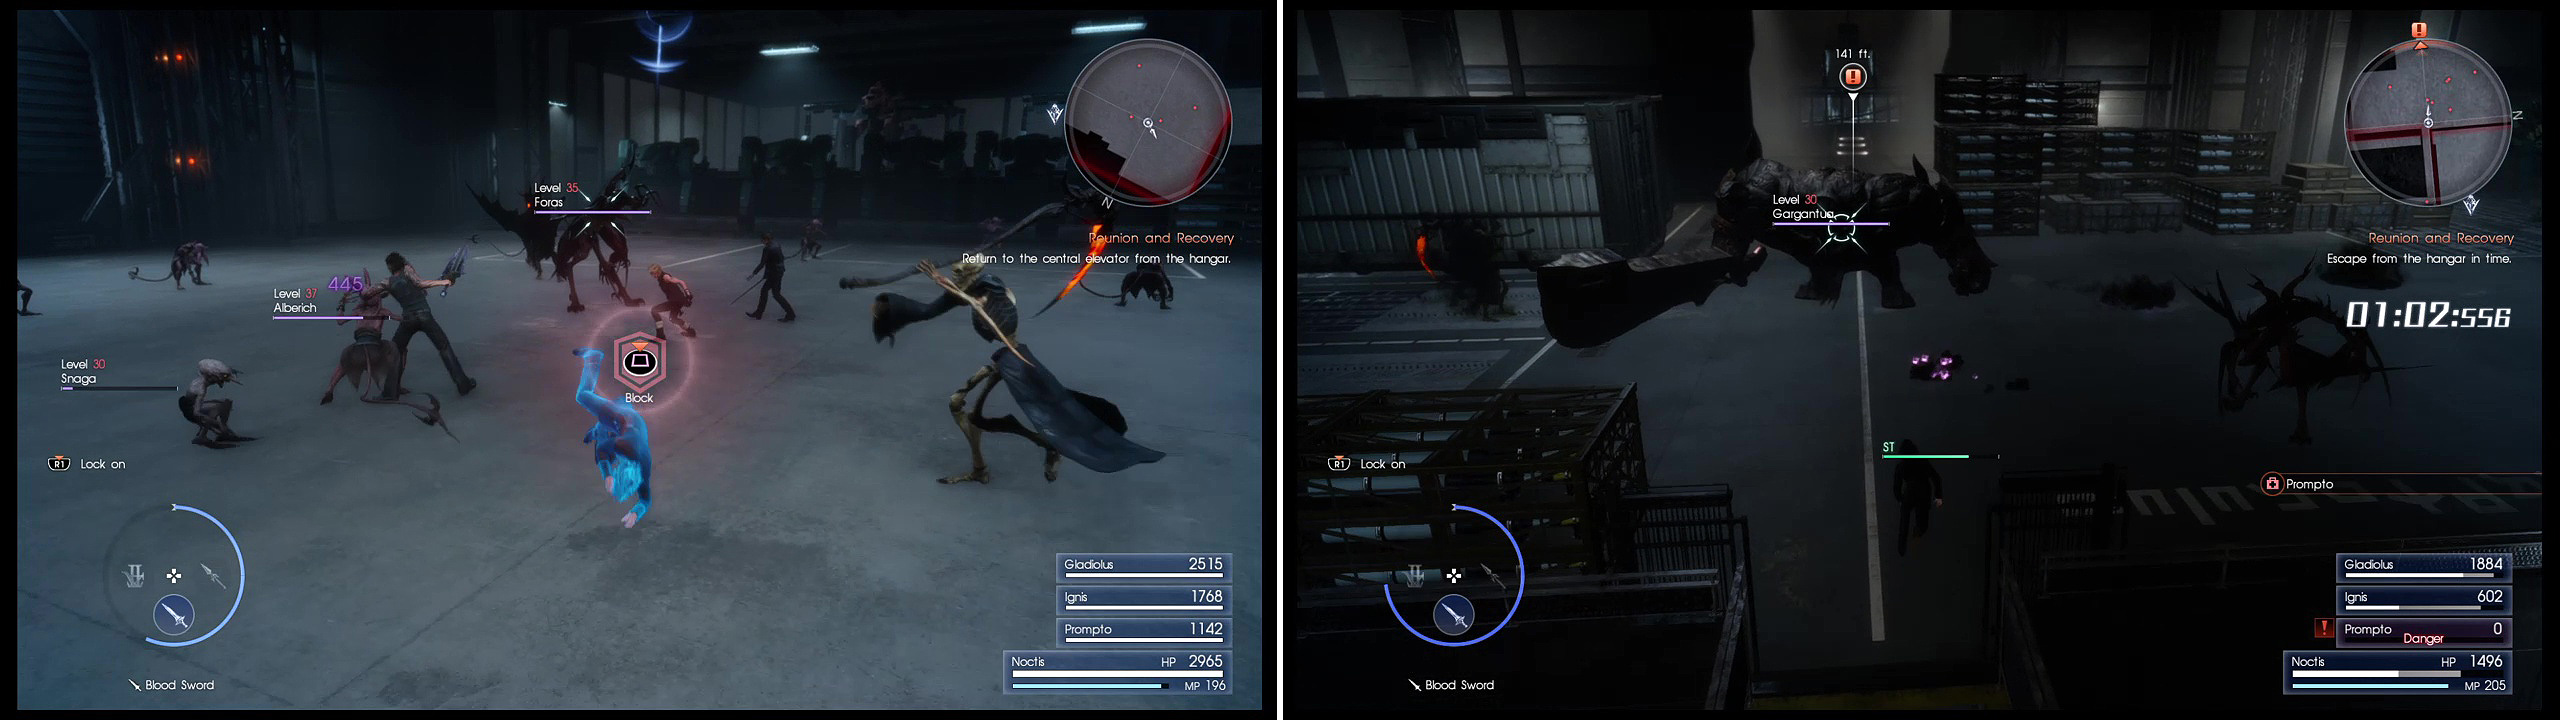 Immediately after the battle with Ravus, daemons will pour into the hangar (left). After a while, you must keep running to escape with Noctis, dodging everything (right).